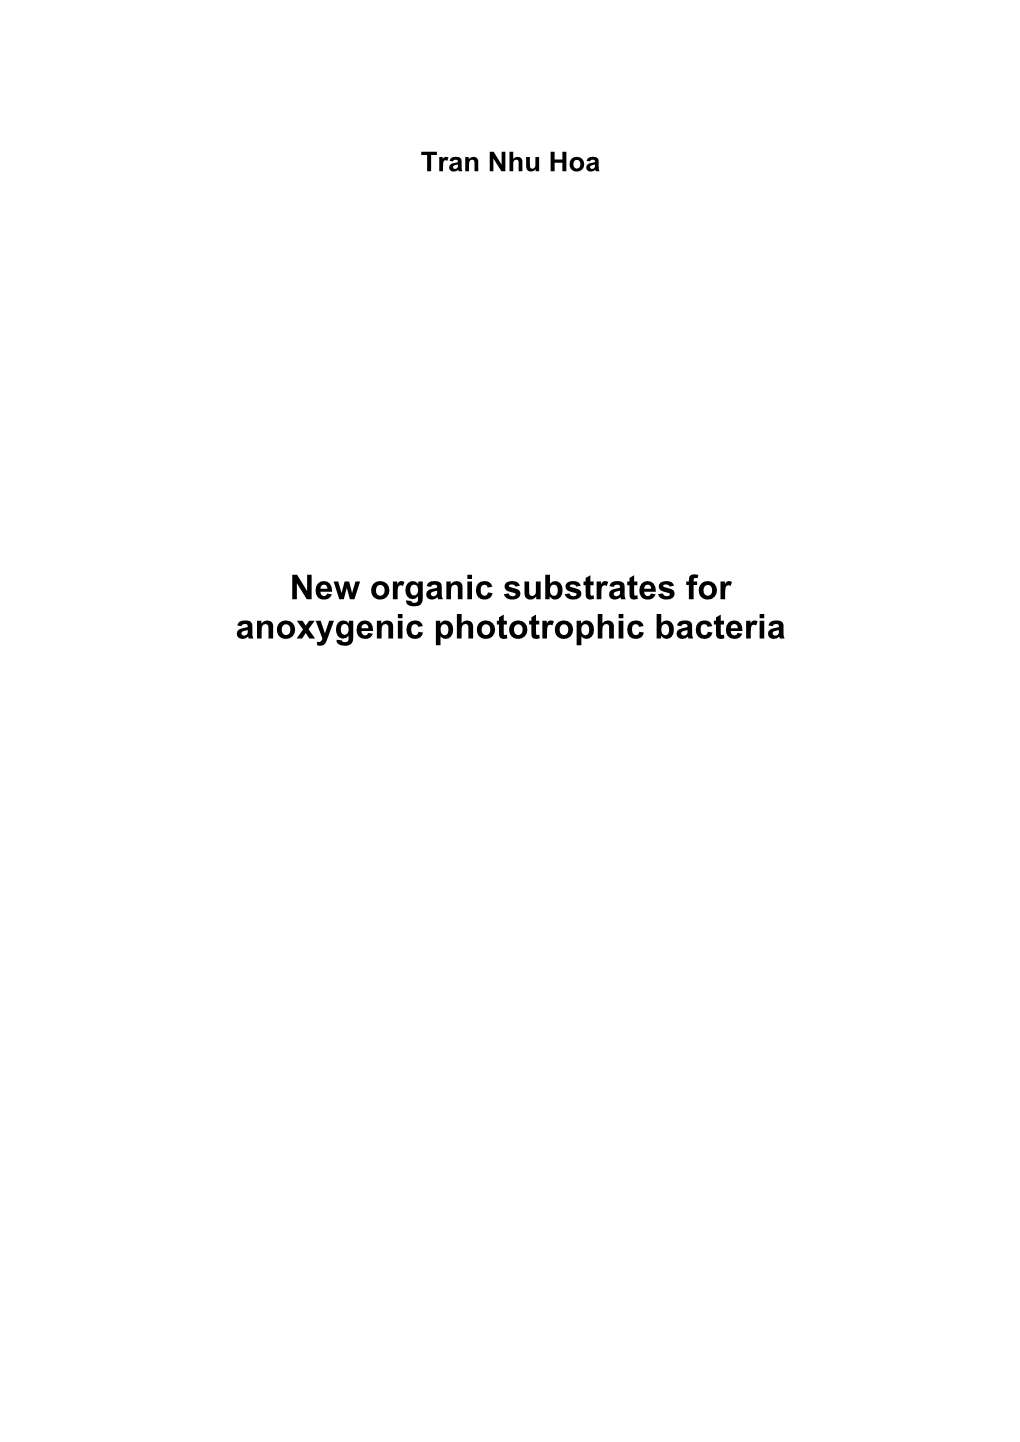 New Organic Substrates for Anoxygenic Phototrophic Bacteria